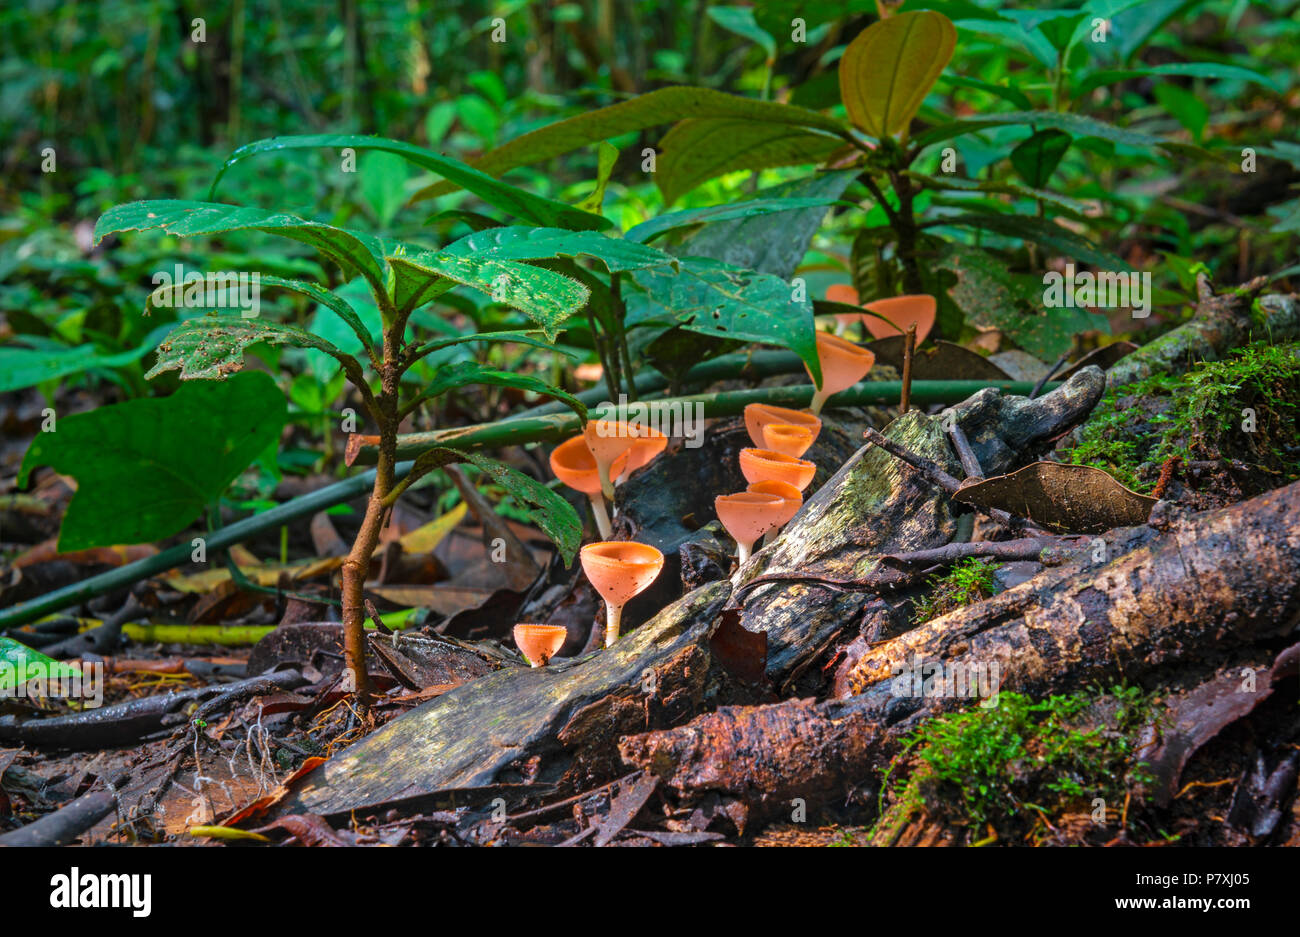 Long exposure photograph of the Amazon Rainforest floor with red neotropical cup fungus (Cookeina sulcipes) inside the Yasuni National Park, Ecuador. Stock Photo